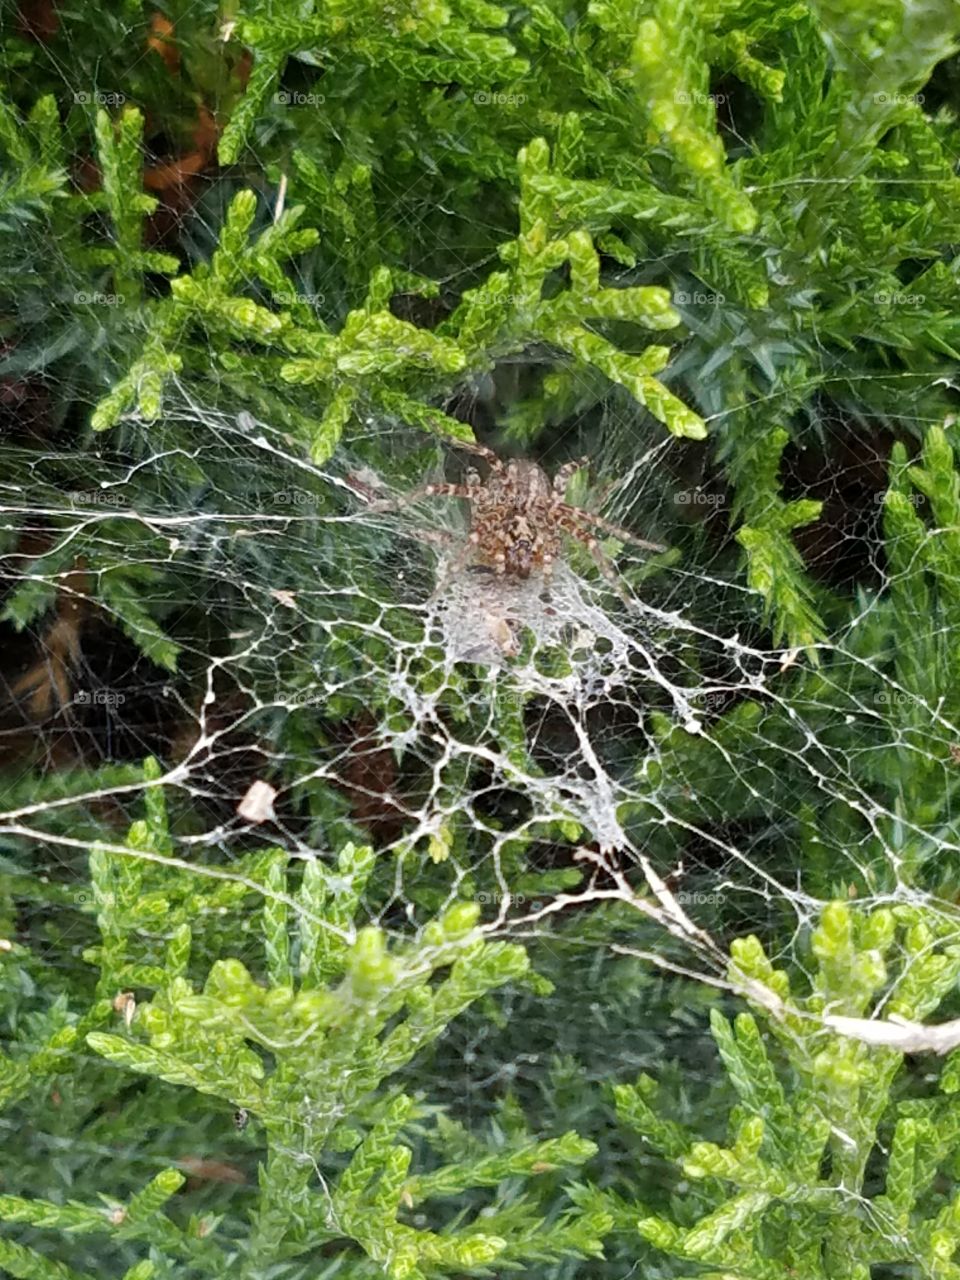 spider in his web